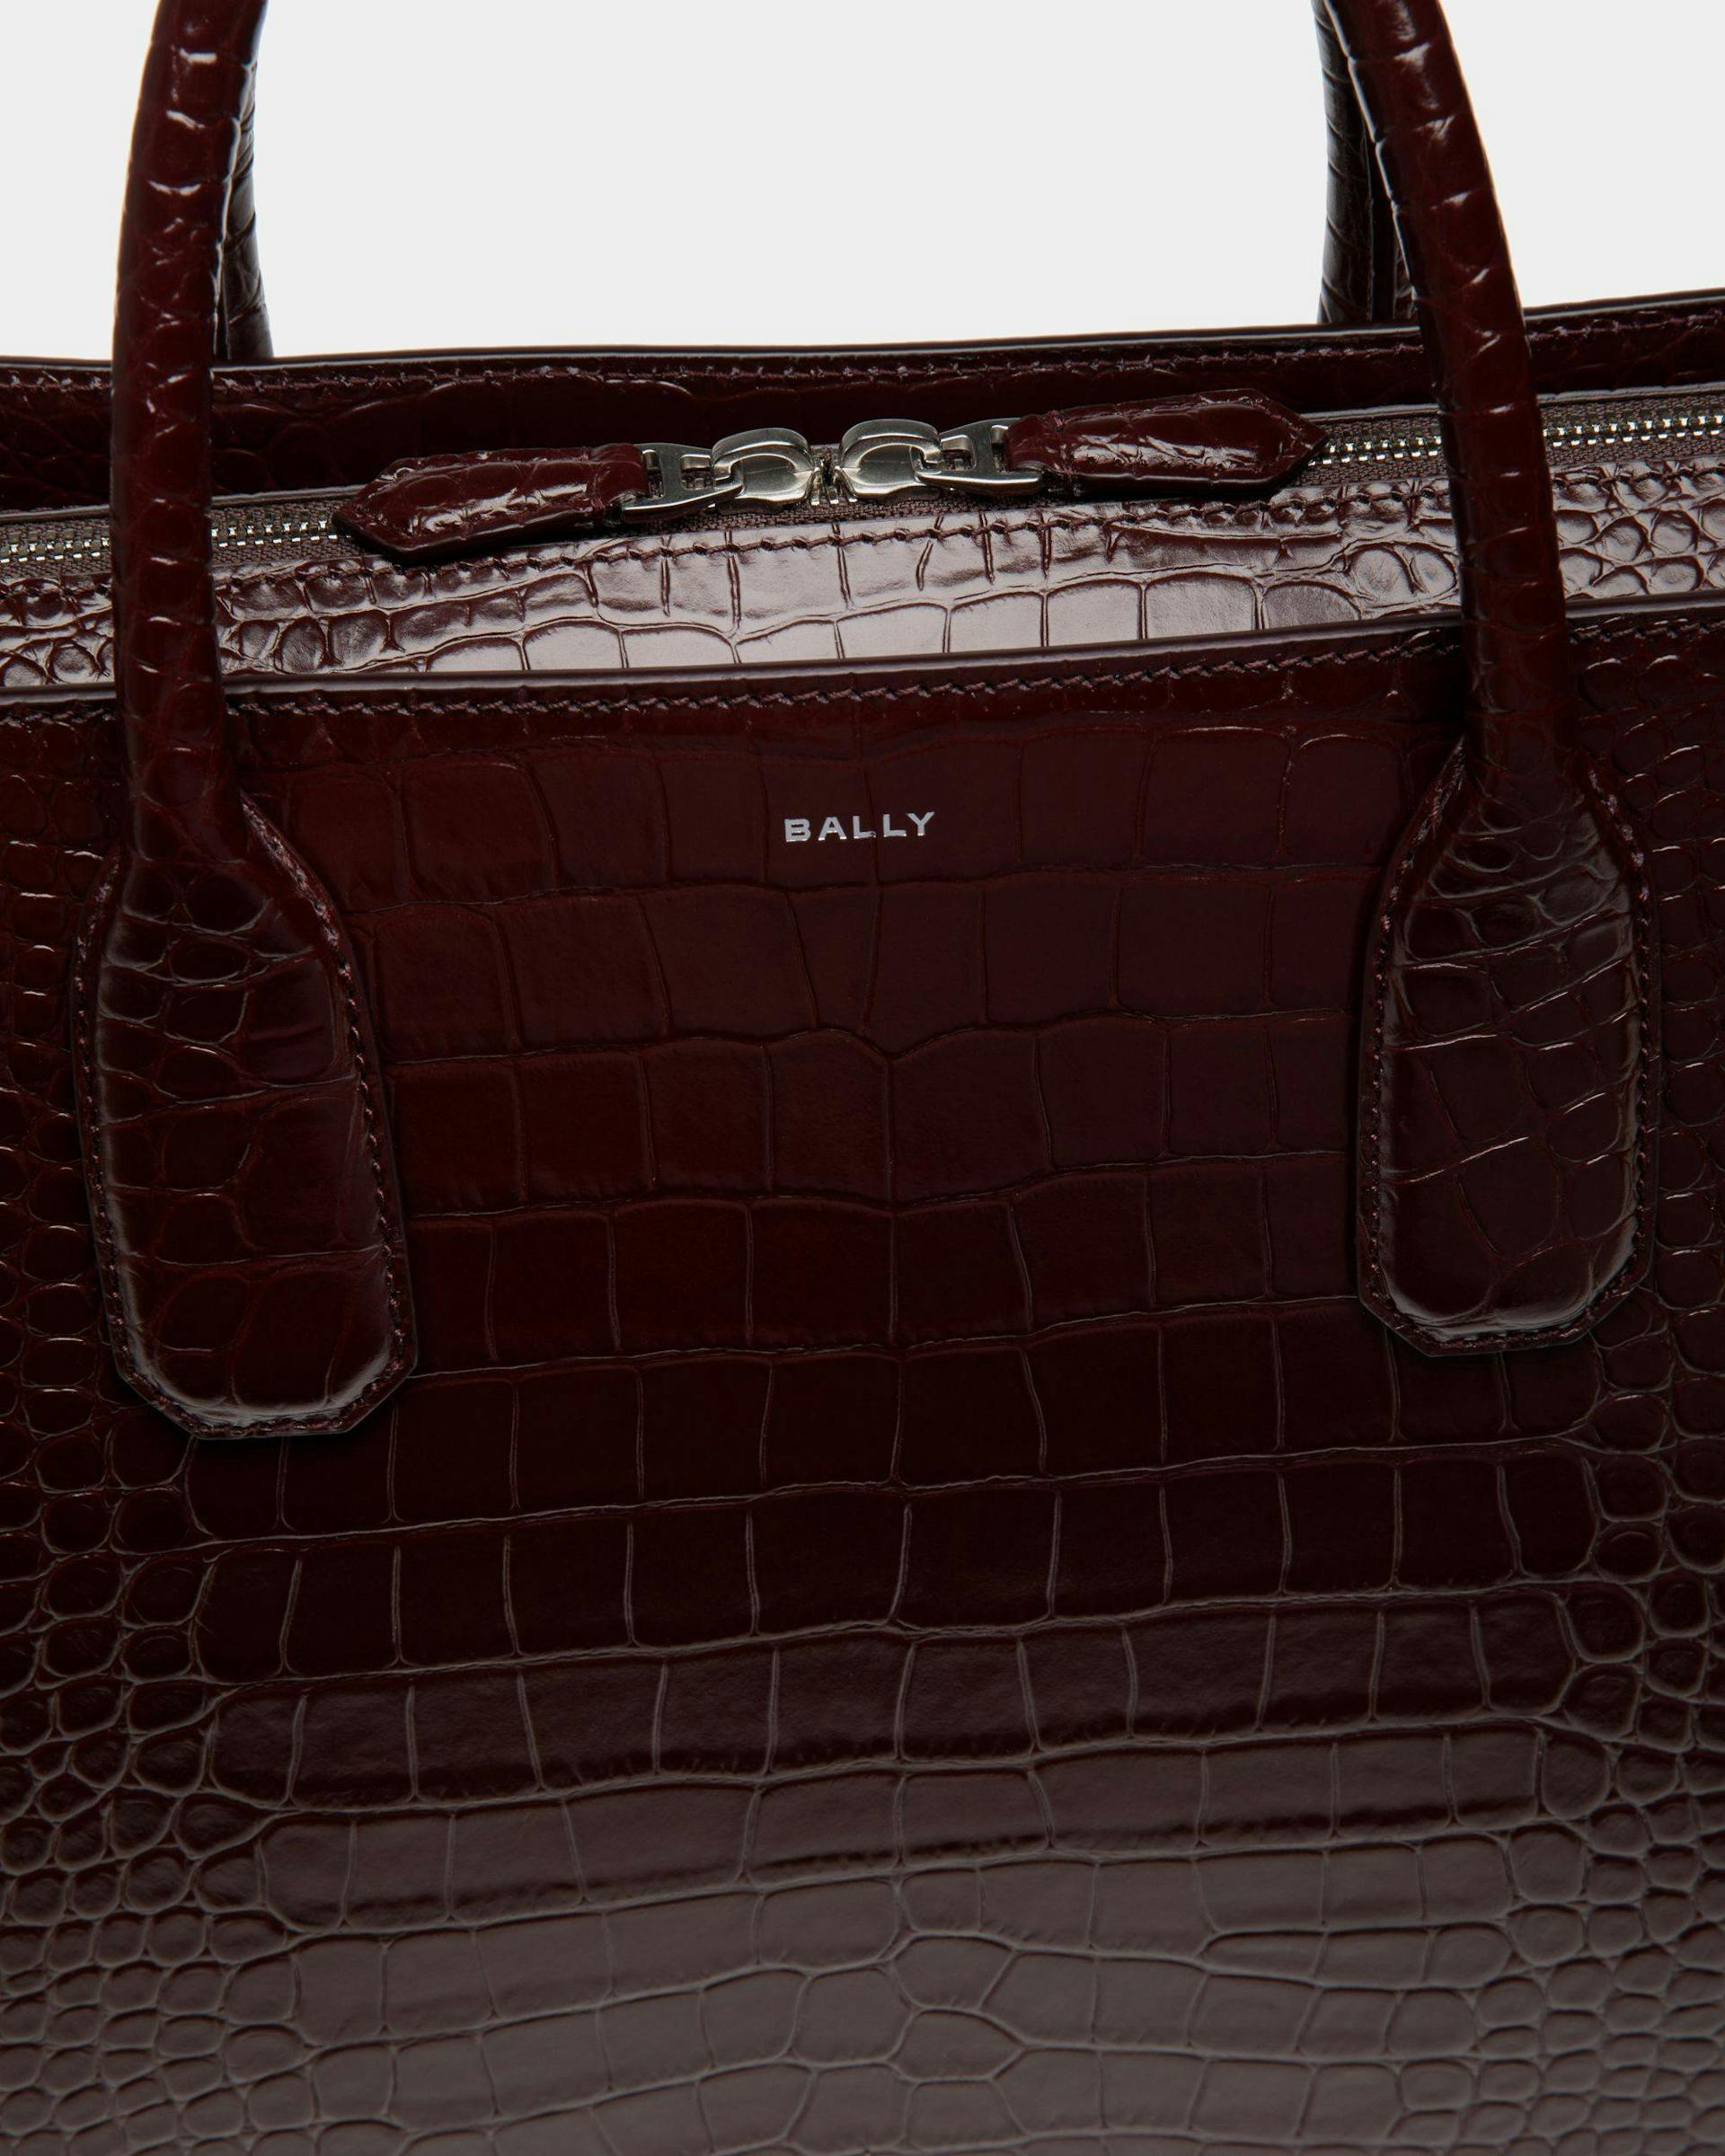 Men's Banque Business Bag In Chablis Leather | Bally | Still Life Detail